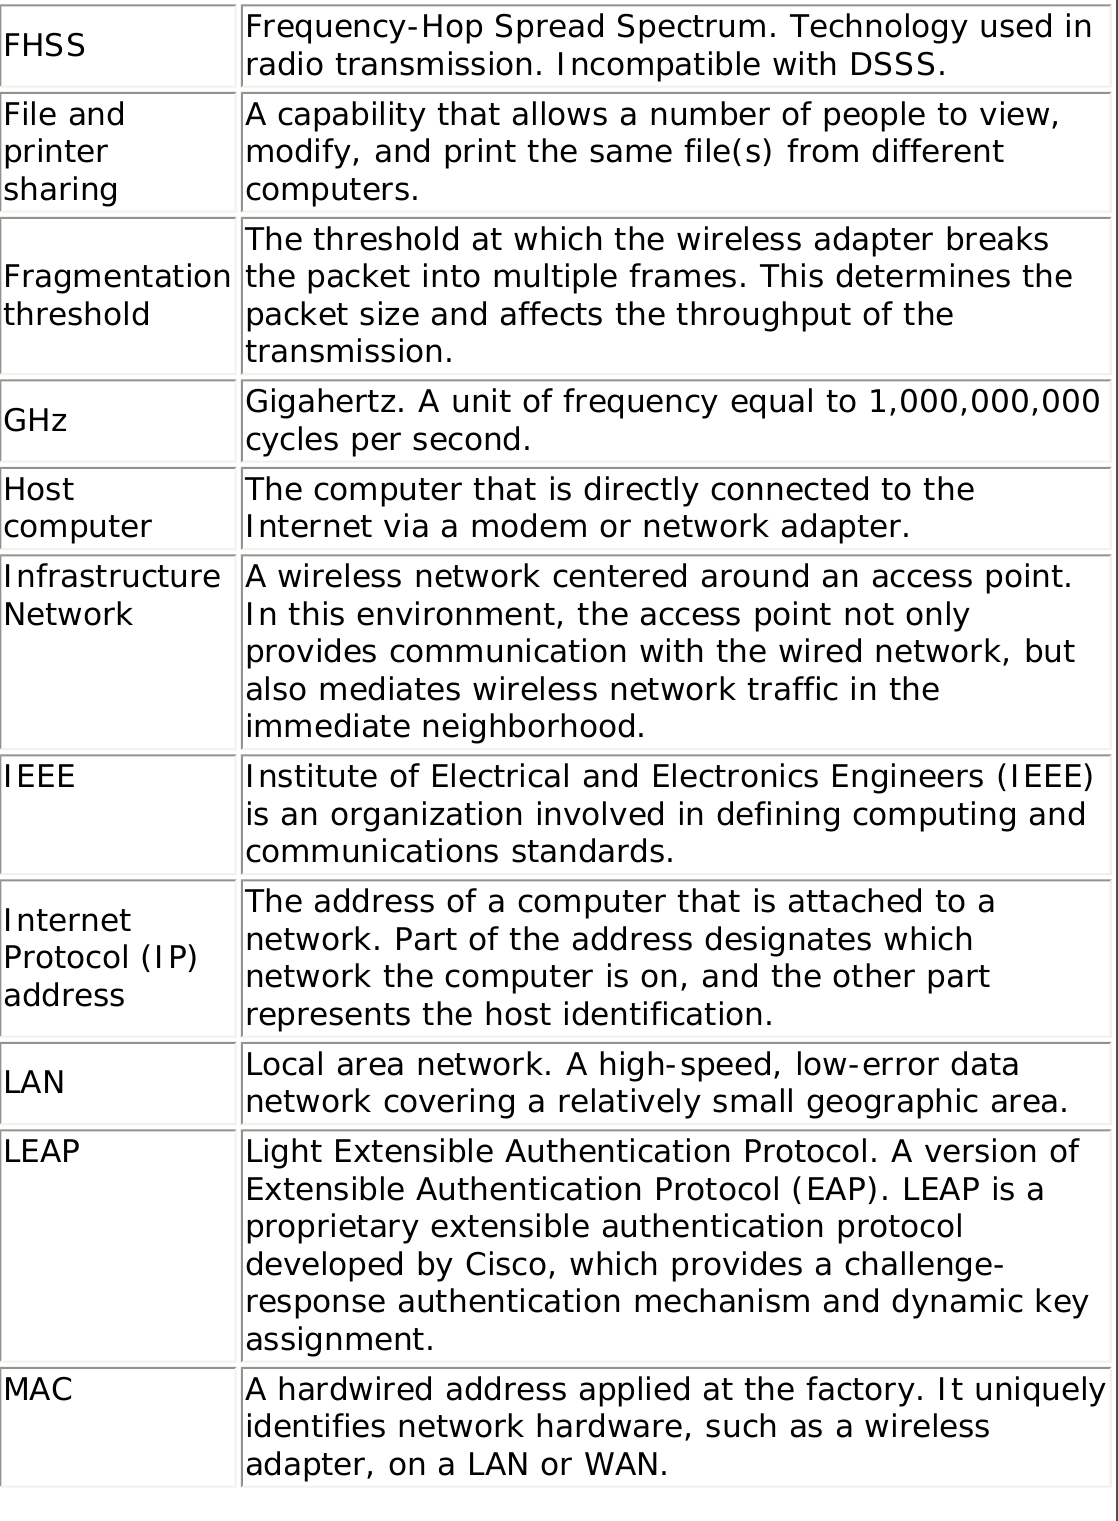 FHSS Frequency-Hop Spread Spectrum. Technology used in radio transmission. Incompatible with DSSS.File and printer sharingA capability that allows a number of people to view, modify, and print the same file(s) from different computers.Fragmentation thresholdThe threshold at which the wireless adapter breaks the packet into multiple frames. This determines the packet size and affects the throughput of the transmission.GHz Gigahertz. A unit of frequency equal to 1,000,000,000 cycles per second.Host computer The computer that is directly connected to the Internet via a modem or network adapter.Infrastructure Network A wireless network centered around an access point. In this environment, the access point not only provides communication with the wired network, but also mediates wireless network traffic in the immediate neighborhood.IEEE Institute of Electrical and Electronics Engineers (IEEE) is an organization involved in defining computing and communications standards.Internet Protocol (IP) addressThe address of a computer that is attached to a network. Part of the address designates which network the computer is on, and the other part represents the host identification.LAN Local area network. A high-speed, low-error data network covering a relatively small geographic area.LEAP Light Extensible Authentication Protocol. A version of Extensible Authentication Protocol (EAP). LEAP is a proprietary extensible authentication protocol developed by Cisco, which provides a challenge-response authentication mechanism and dynamic key assignment.MAC A hardwired address applied at the factory. It uniquely identifies network hardware, such as a wireless adapter, on a LAN or WAN.